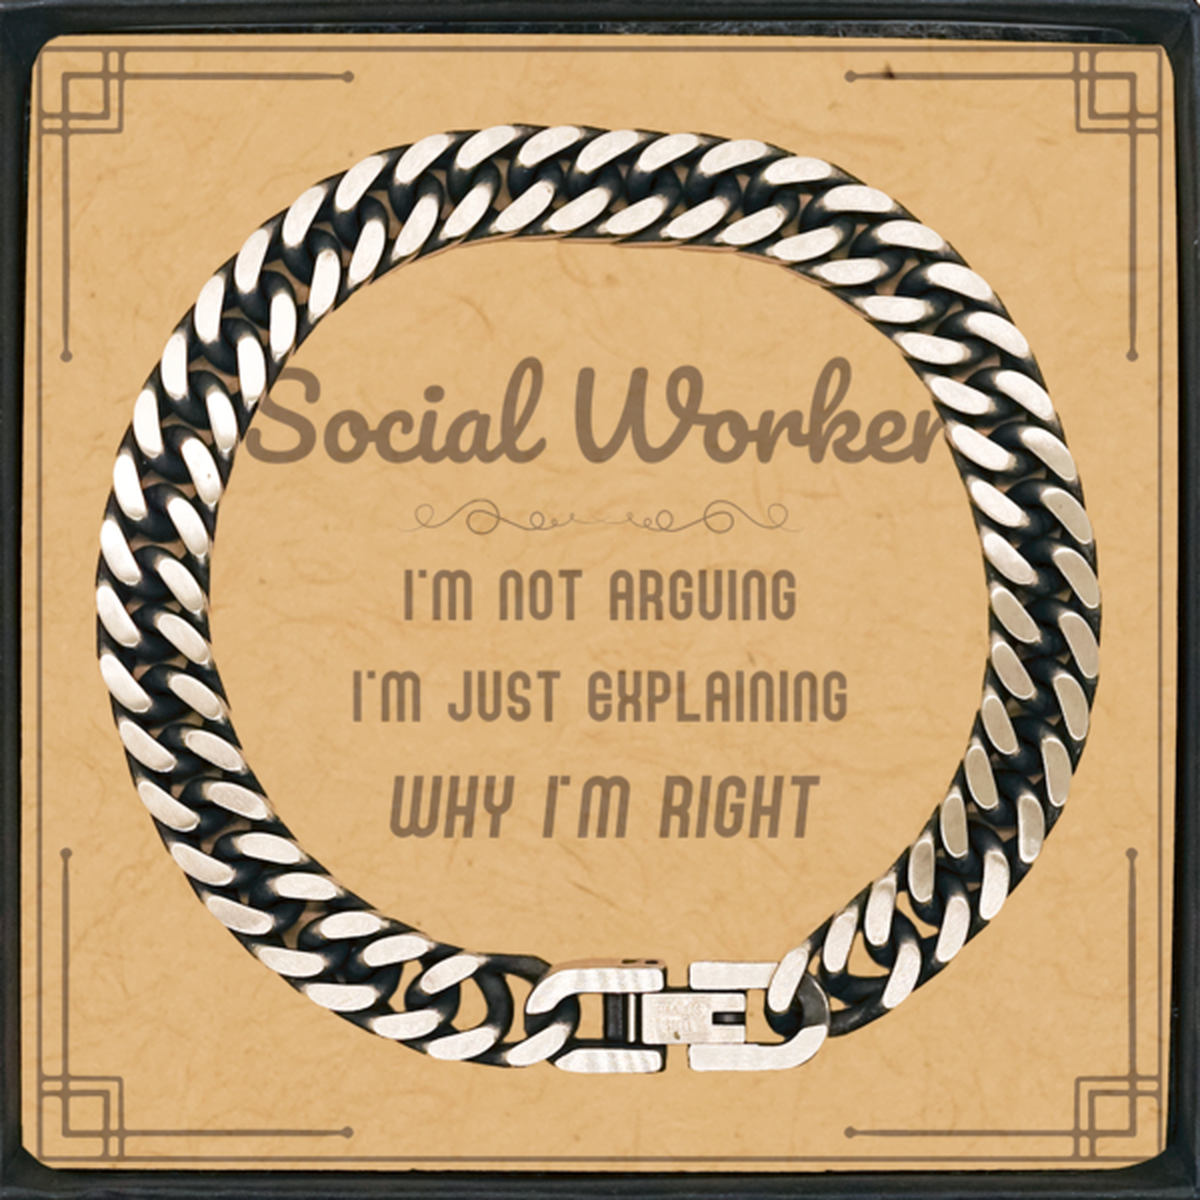 Social Worker I'm not Arguing. I'm Just Explaining Why I'm RIGHT Cuban Link Chain Bracelet, Funny Saying Quote Social Worker Gifts For Social Worker Message Card Graduation Birthday Christmas Gifts for Men Women Coworker